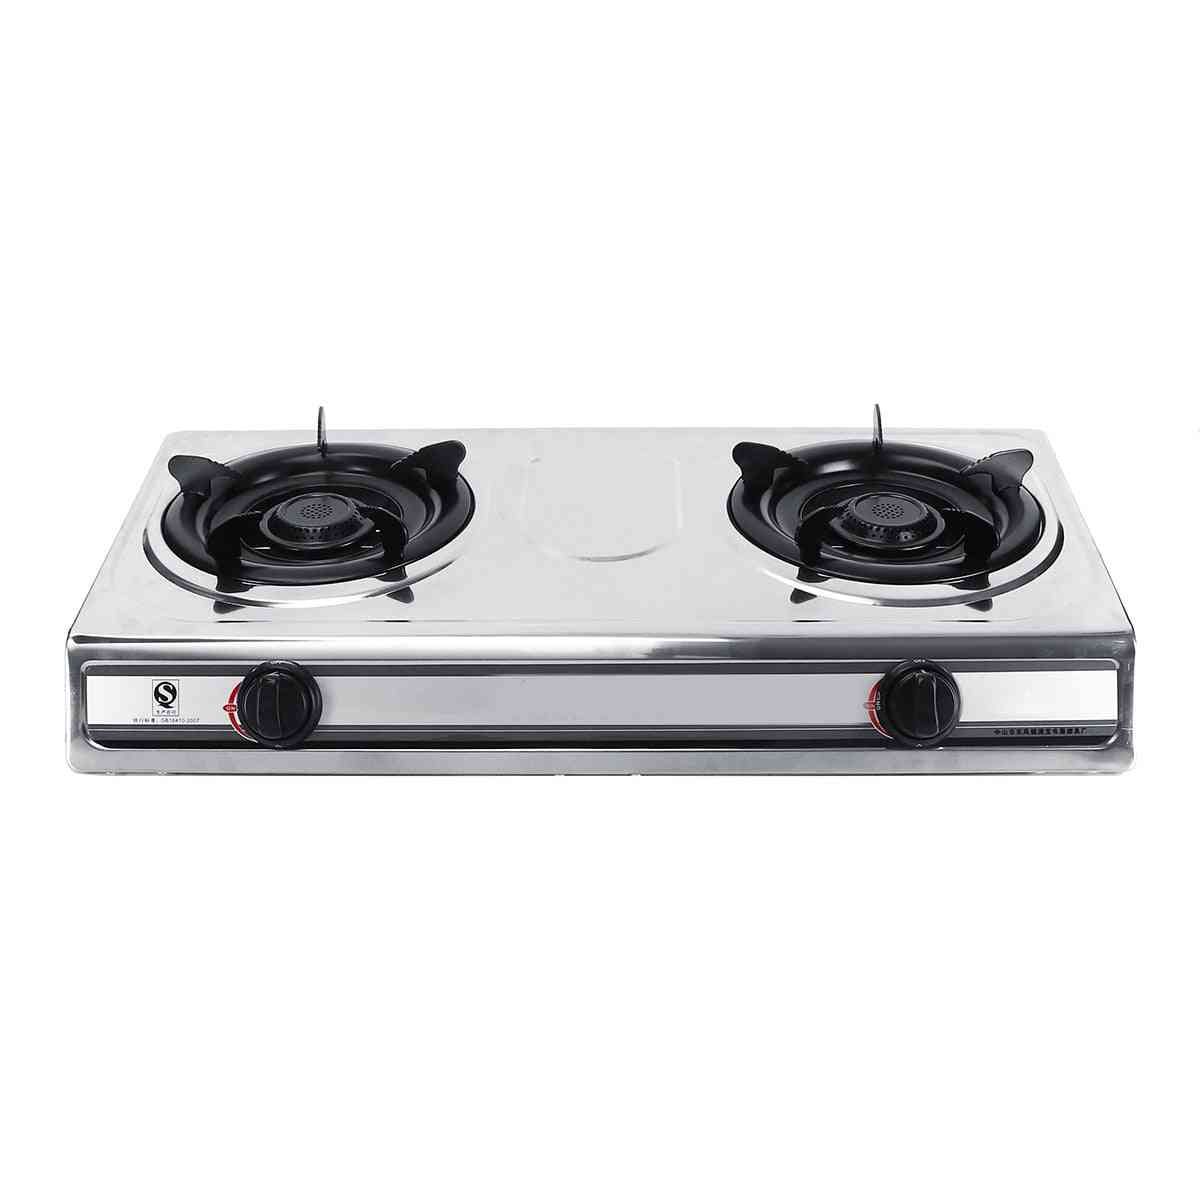 Fierce Double-stove & Benchtop Lpg Liquefied, Cooker Stove With Two Pots